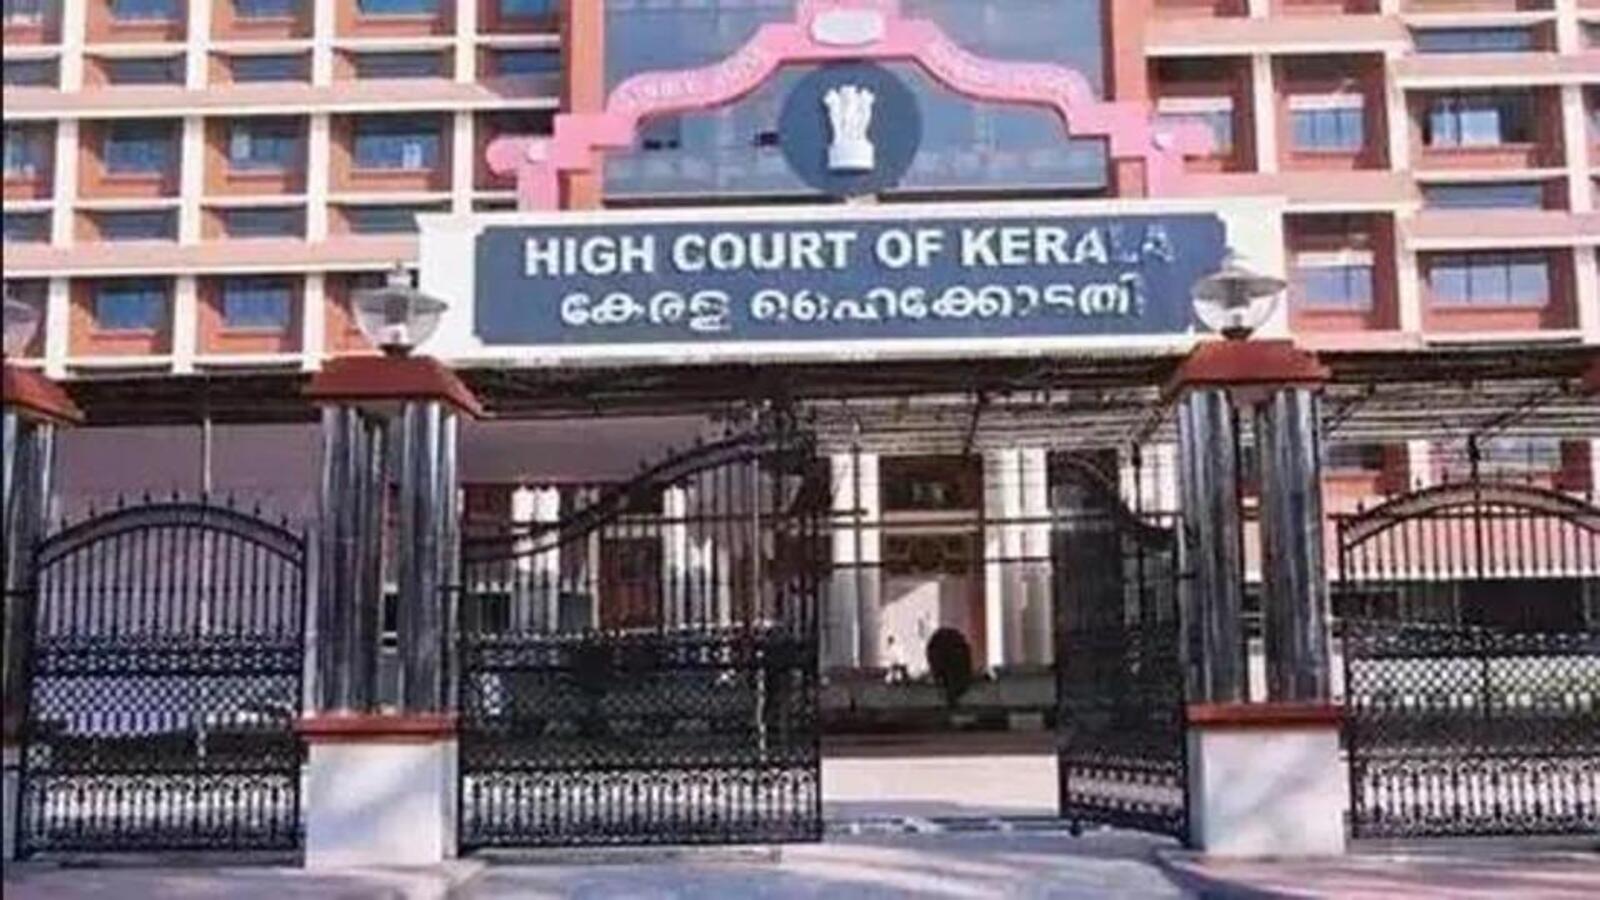 No means no': Don't touch women without their consent, says Kerala HC